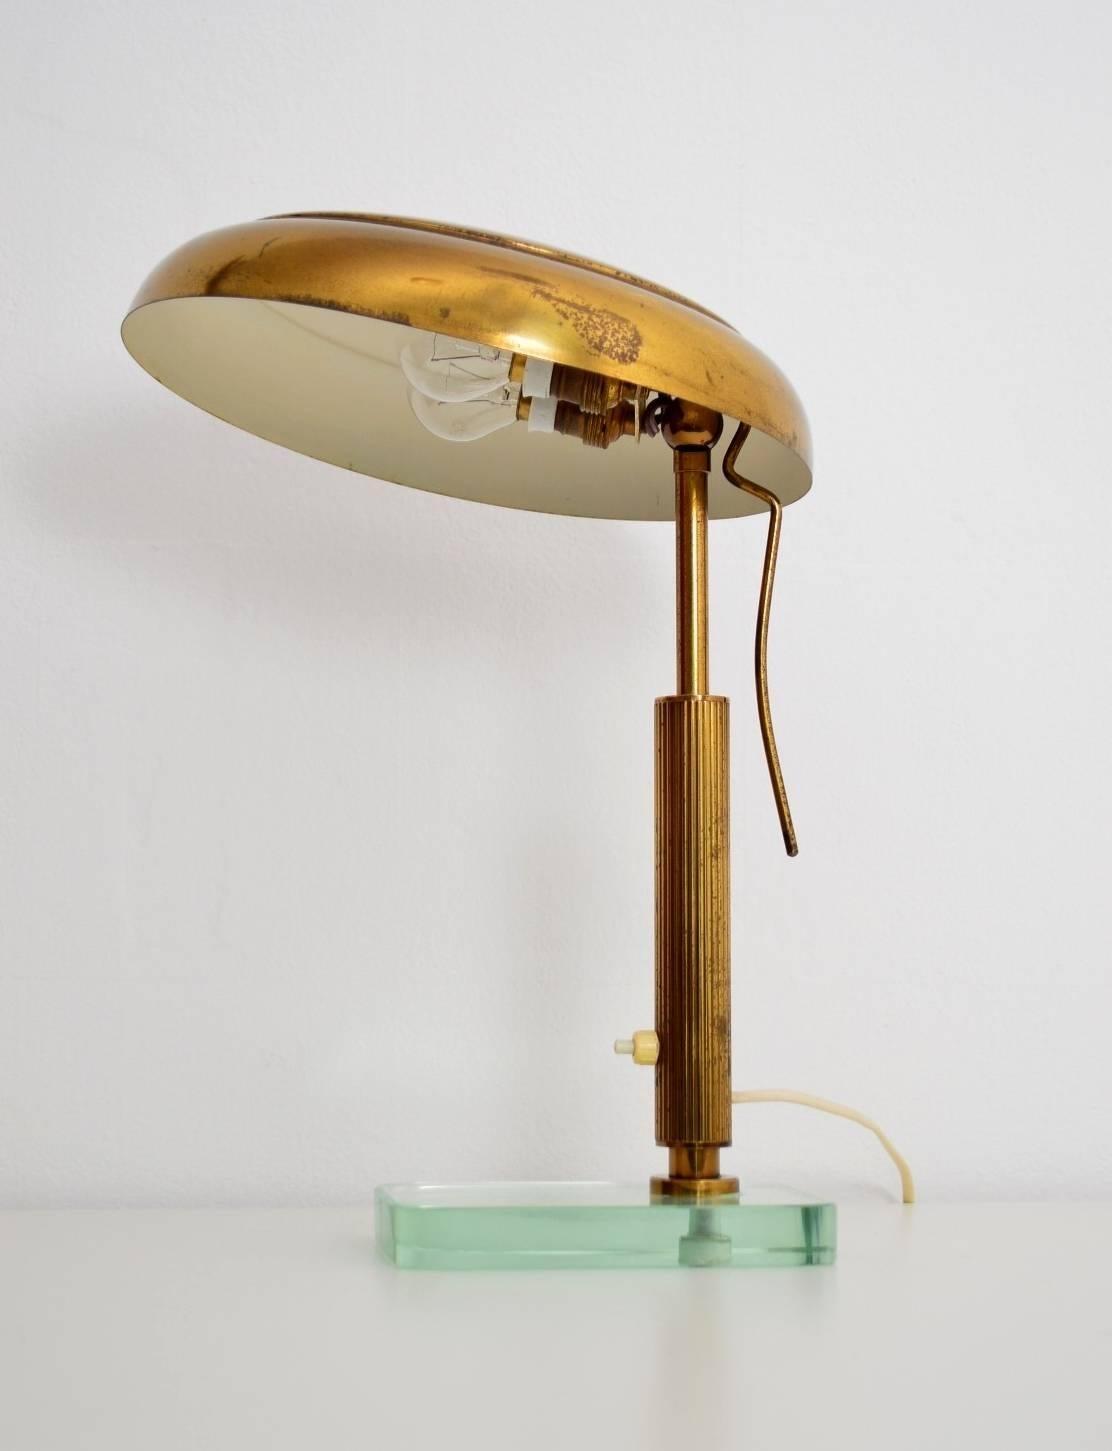 Hand-Crafted Italian Midcentury Brass and Glass Desk or Table Lamp, 1950s